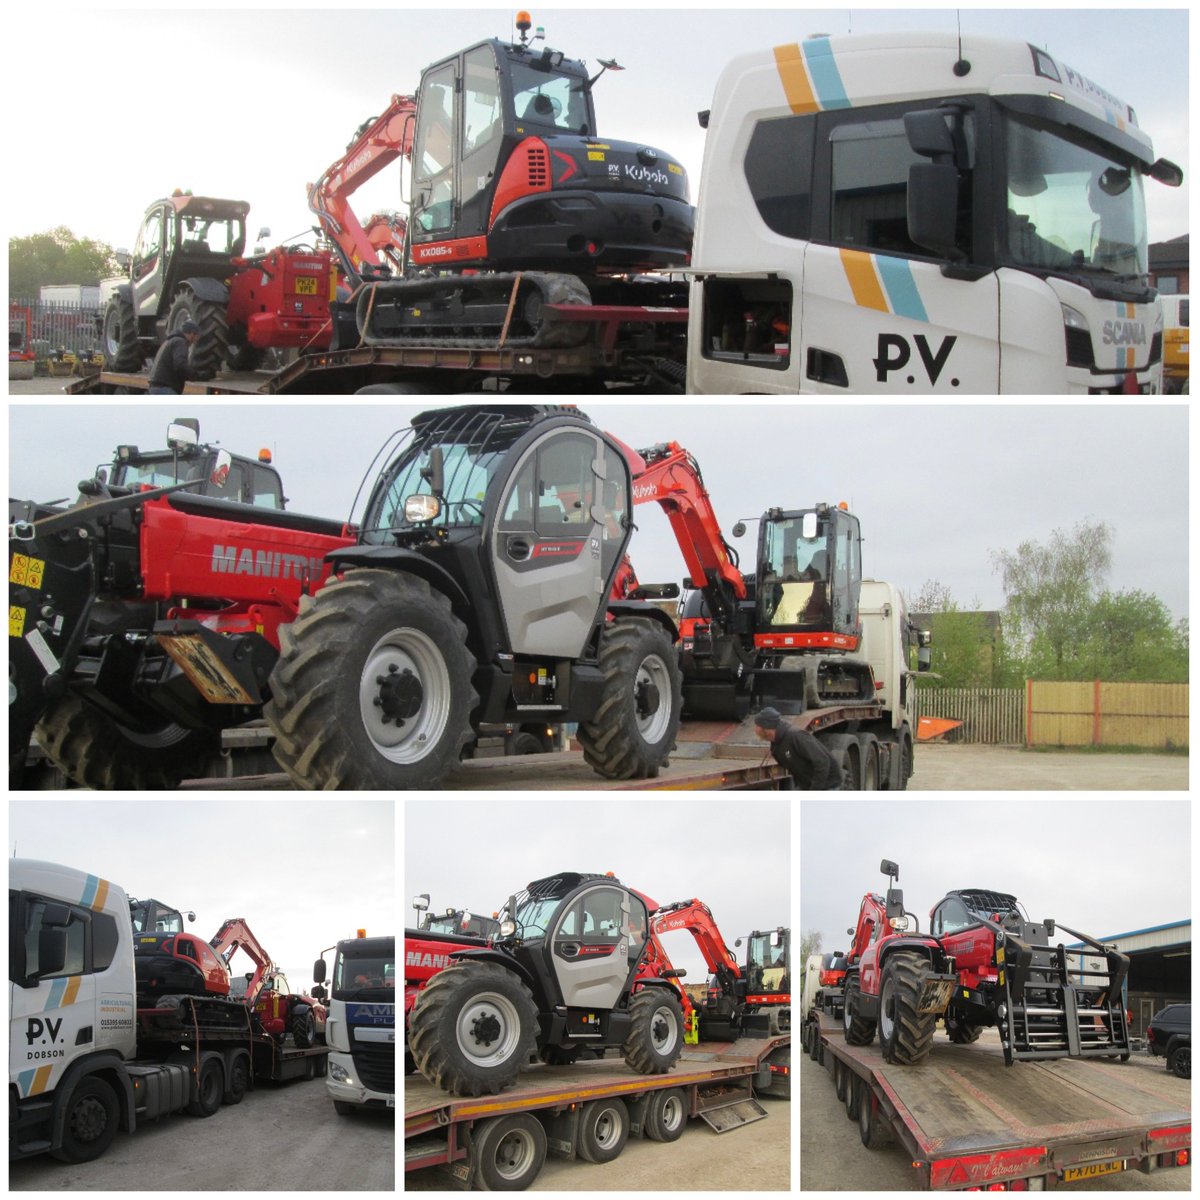 🤩 More NEW stock here at Ambrose 🤩
Photos of our new Kubota KX085-5 & Manitou MT1335H arriving at our yard this morning, thank you to @PV_Dobson_Ltd

☎ 01772 436449
📧 hiredesk@ambrosehire.co.uk

#newstock #excavators #telehandlers #northwestplanthire #planthire